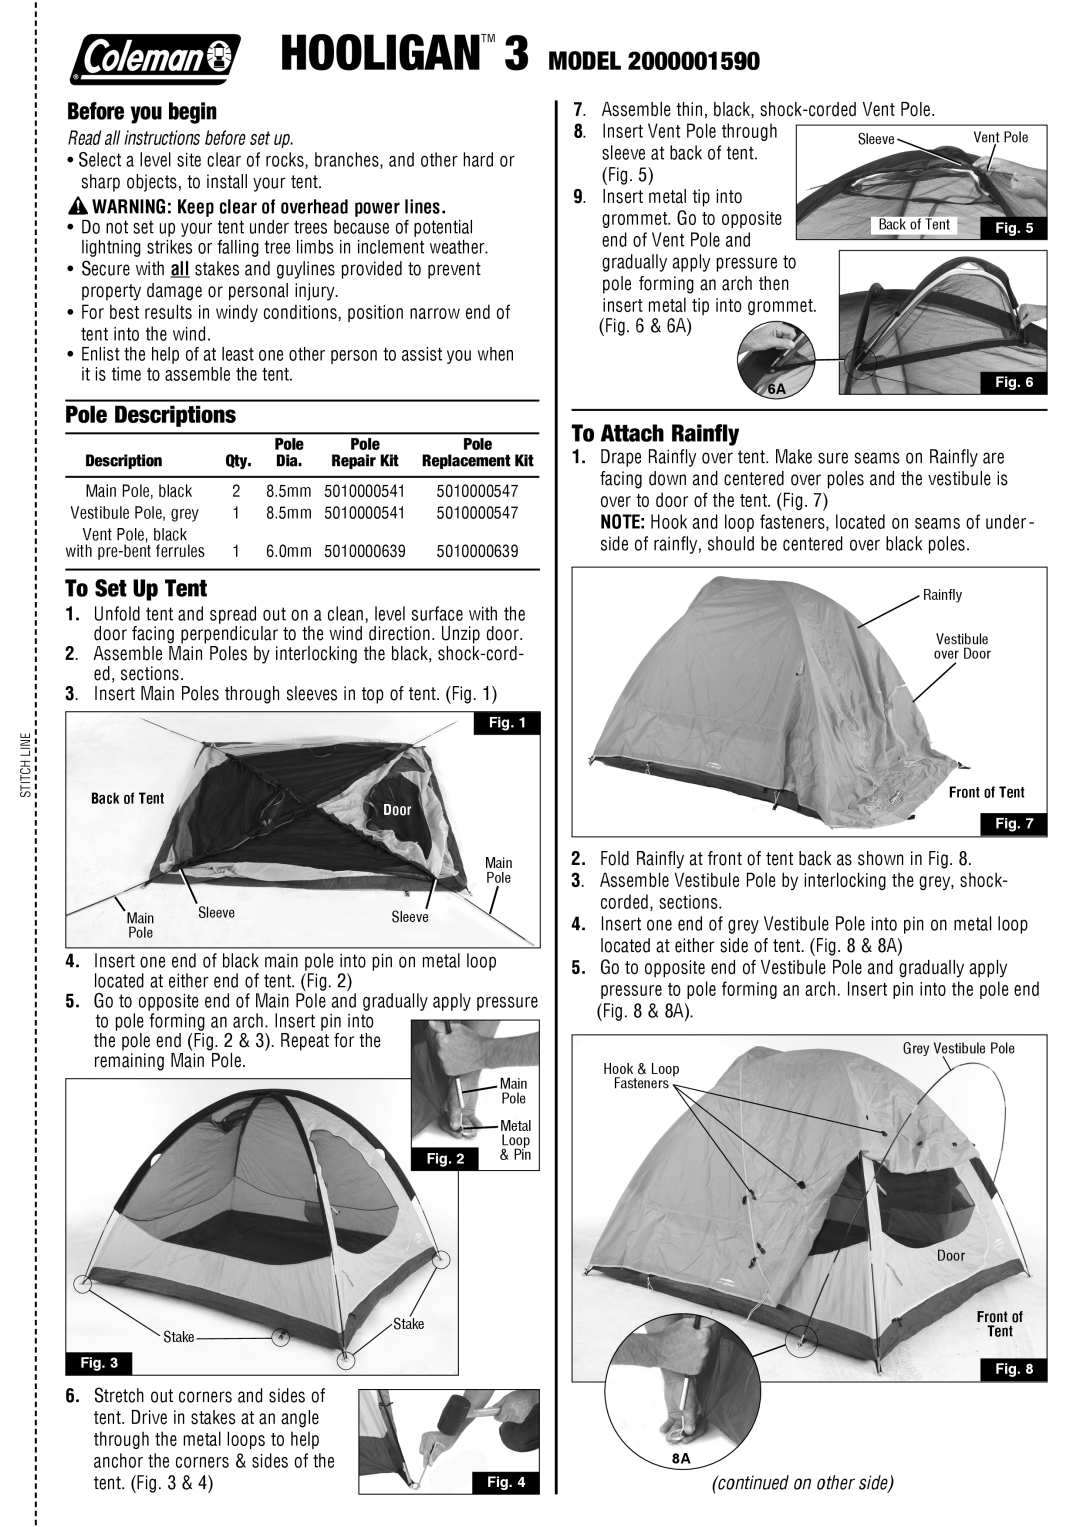 Coleman 2000001590 manual Before you begin, Pole Descriptions, To Set Up Tent, To Attach Rainfly, HOOLIGANtm 3 Model, tent 